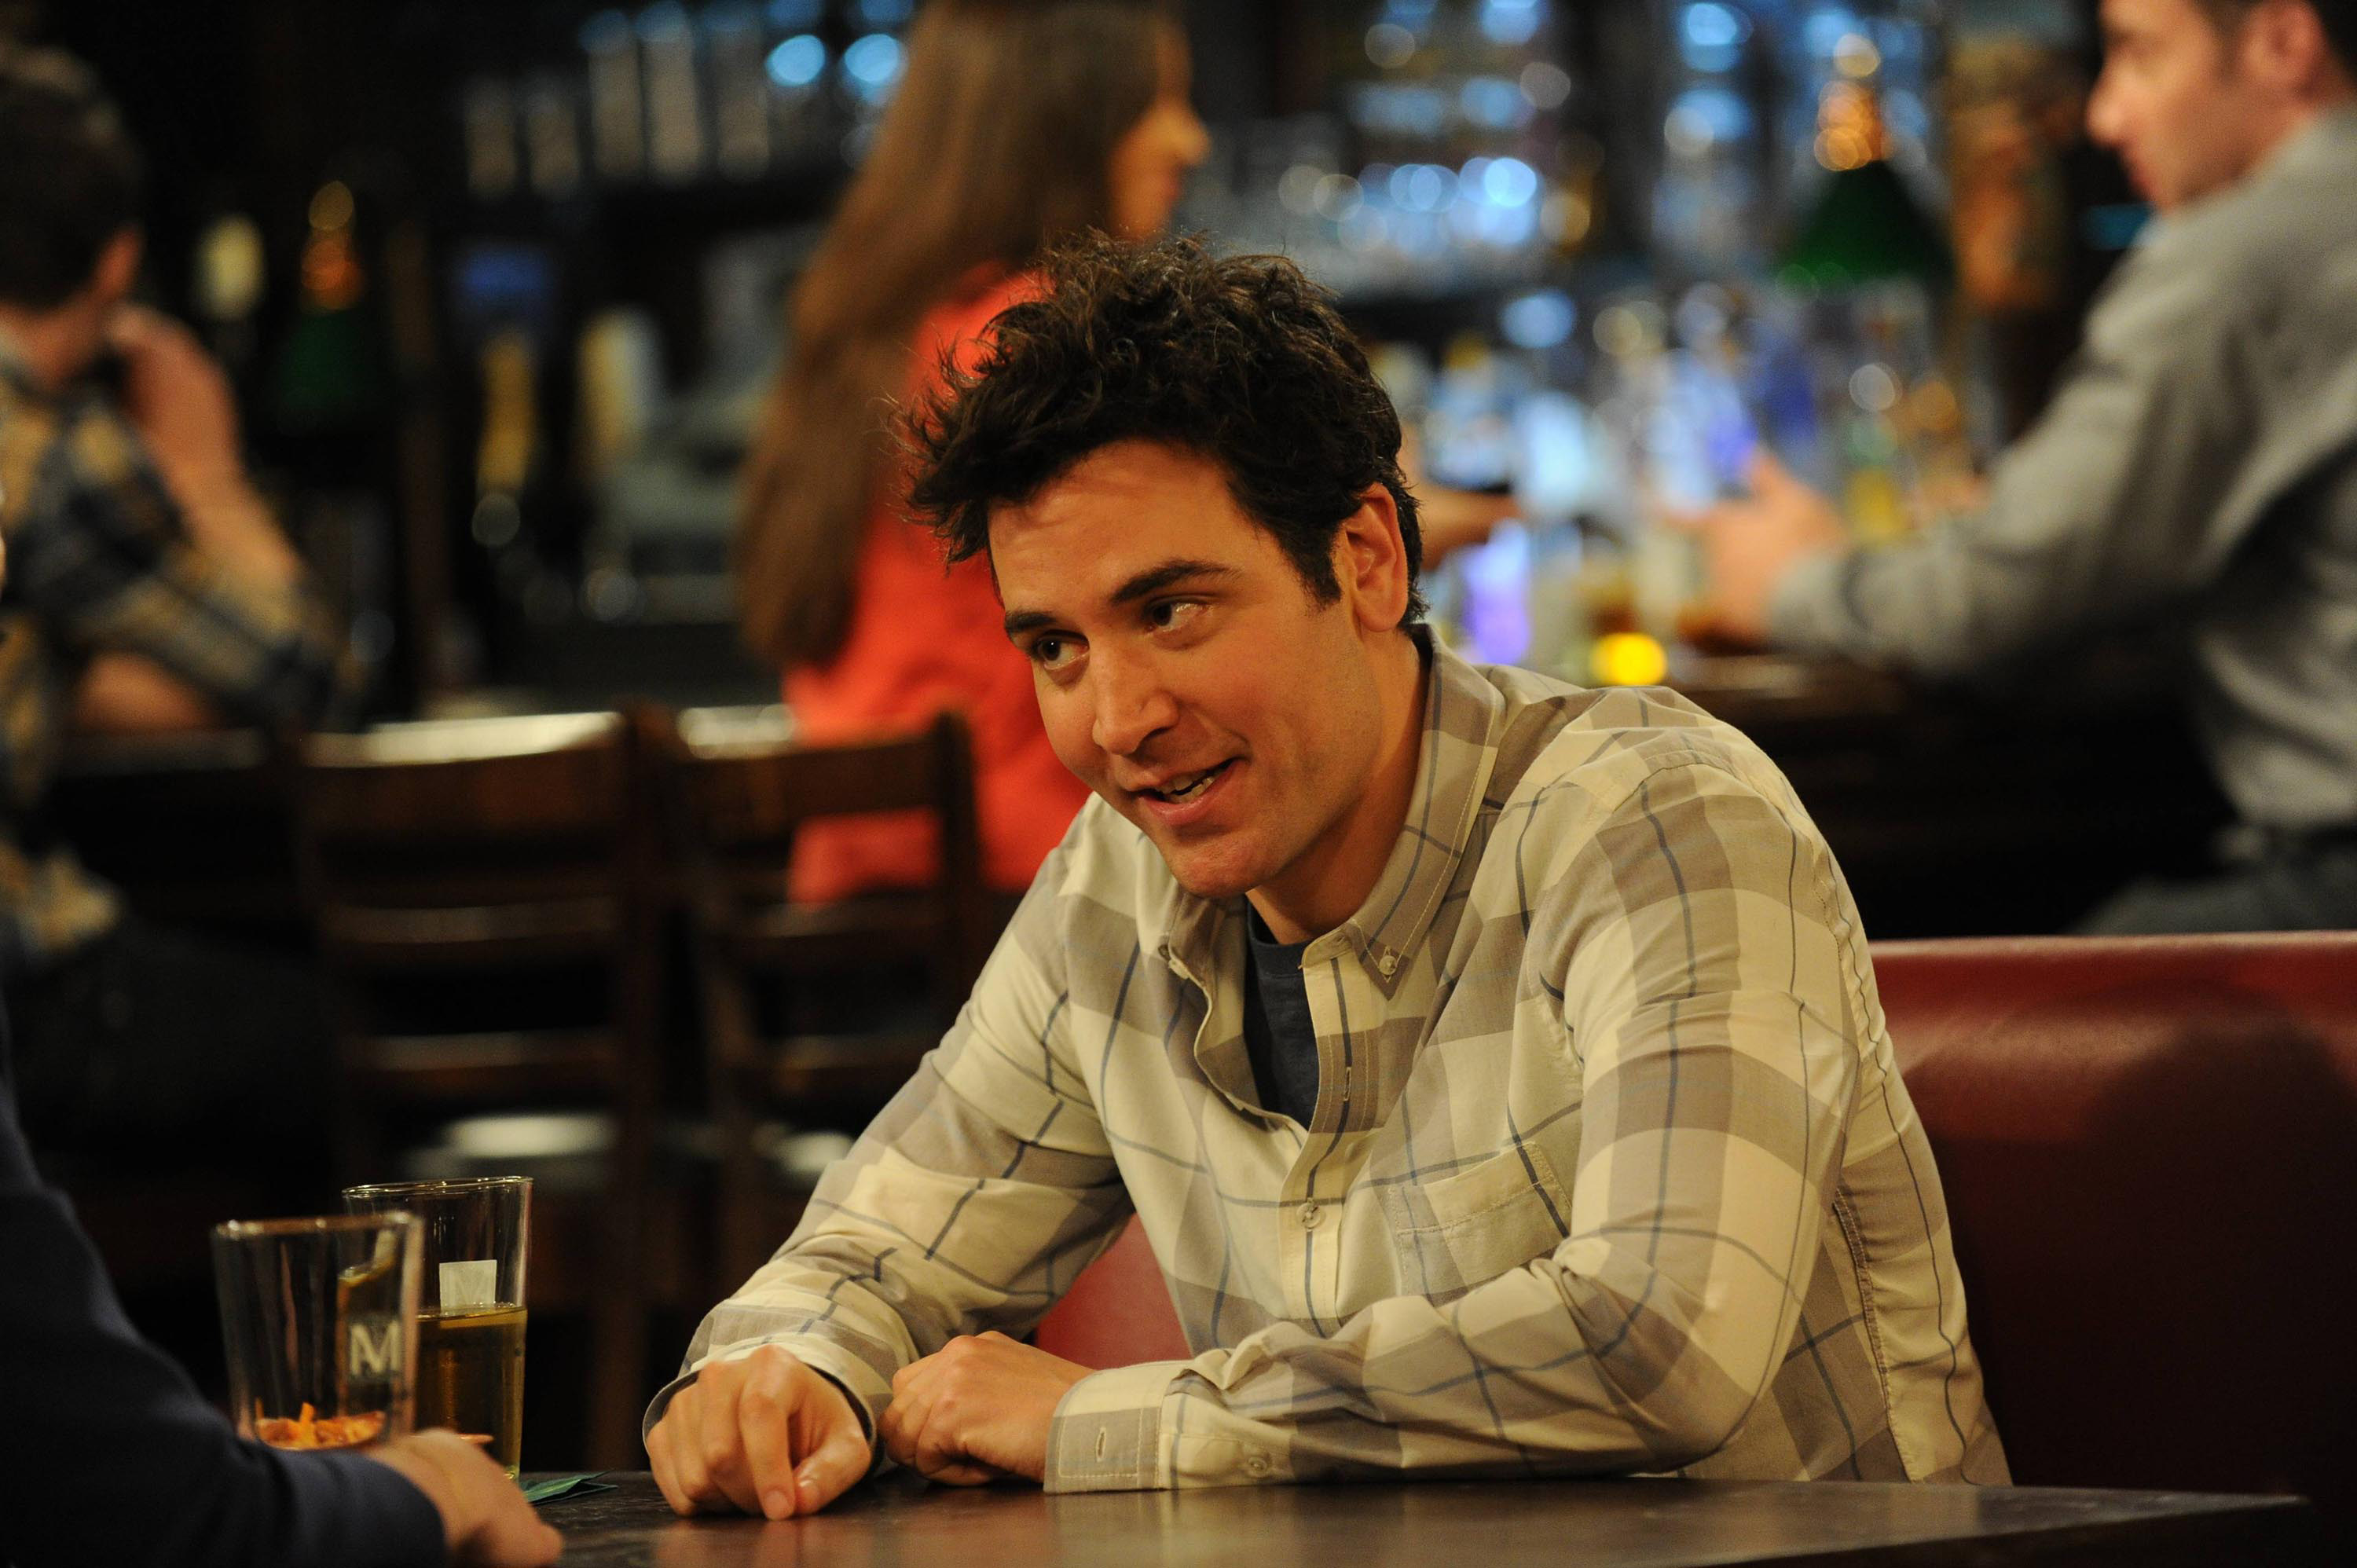 finally: Ted Mosby from How I Met Your Mother. 